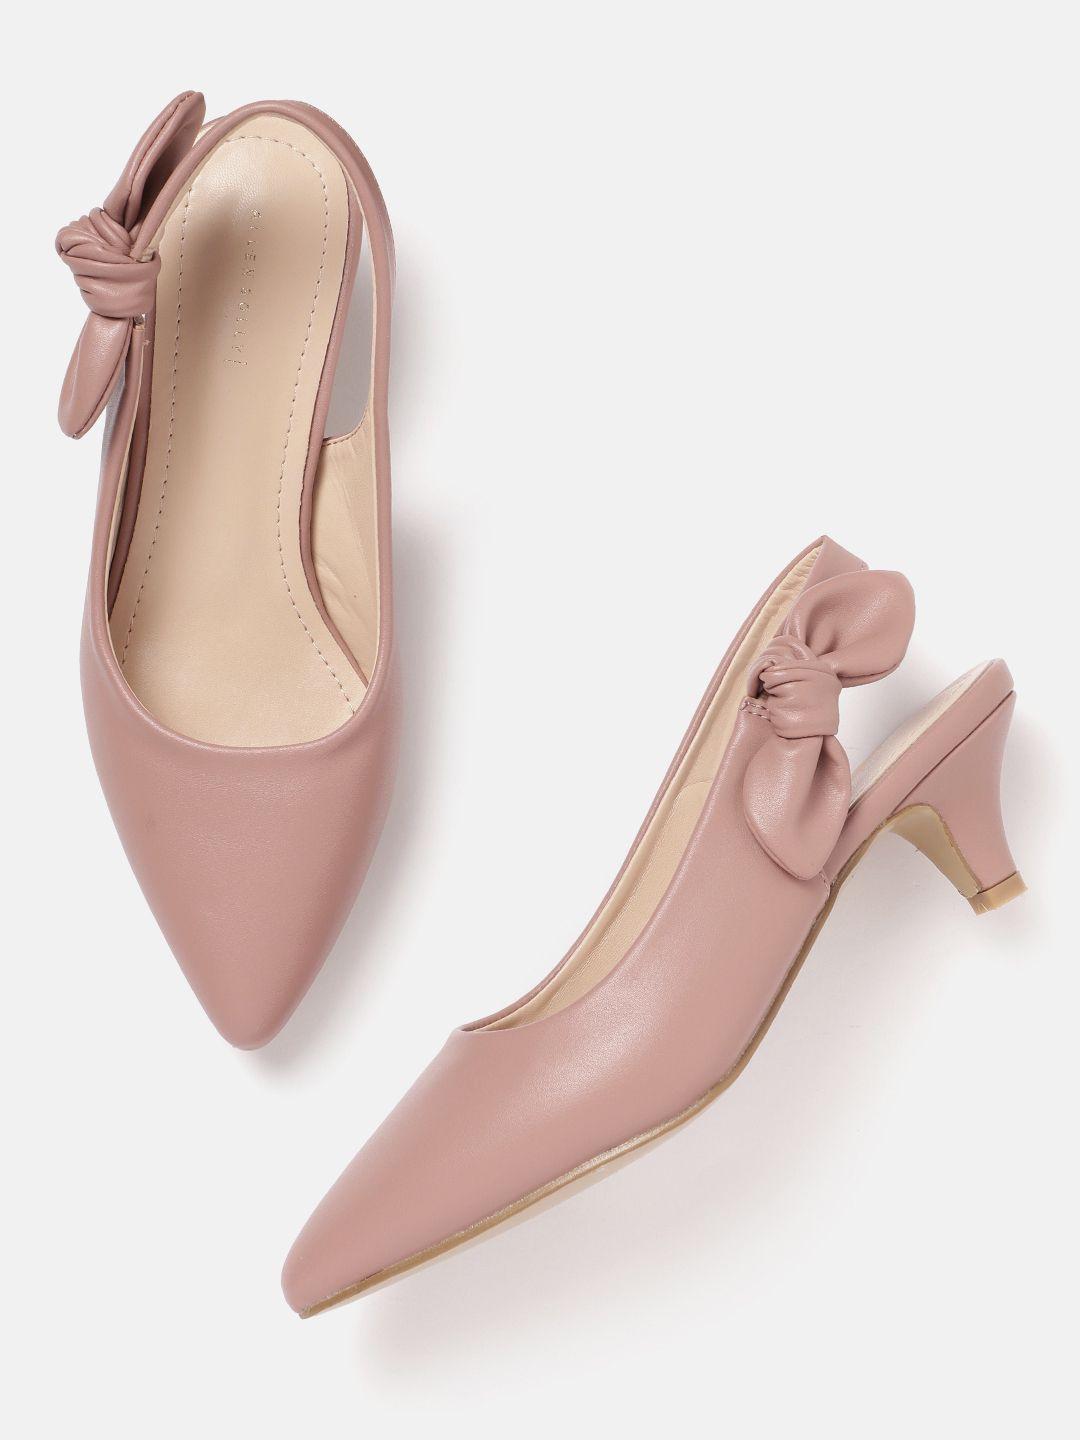 allen-solly-women-pumps-with-bow-detail